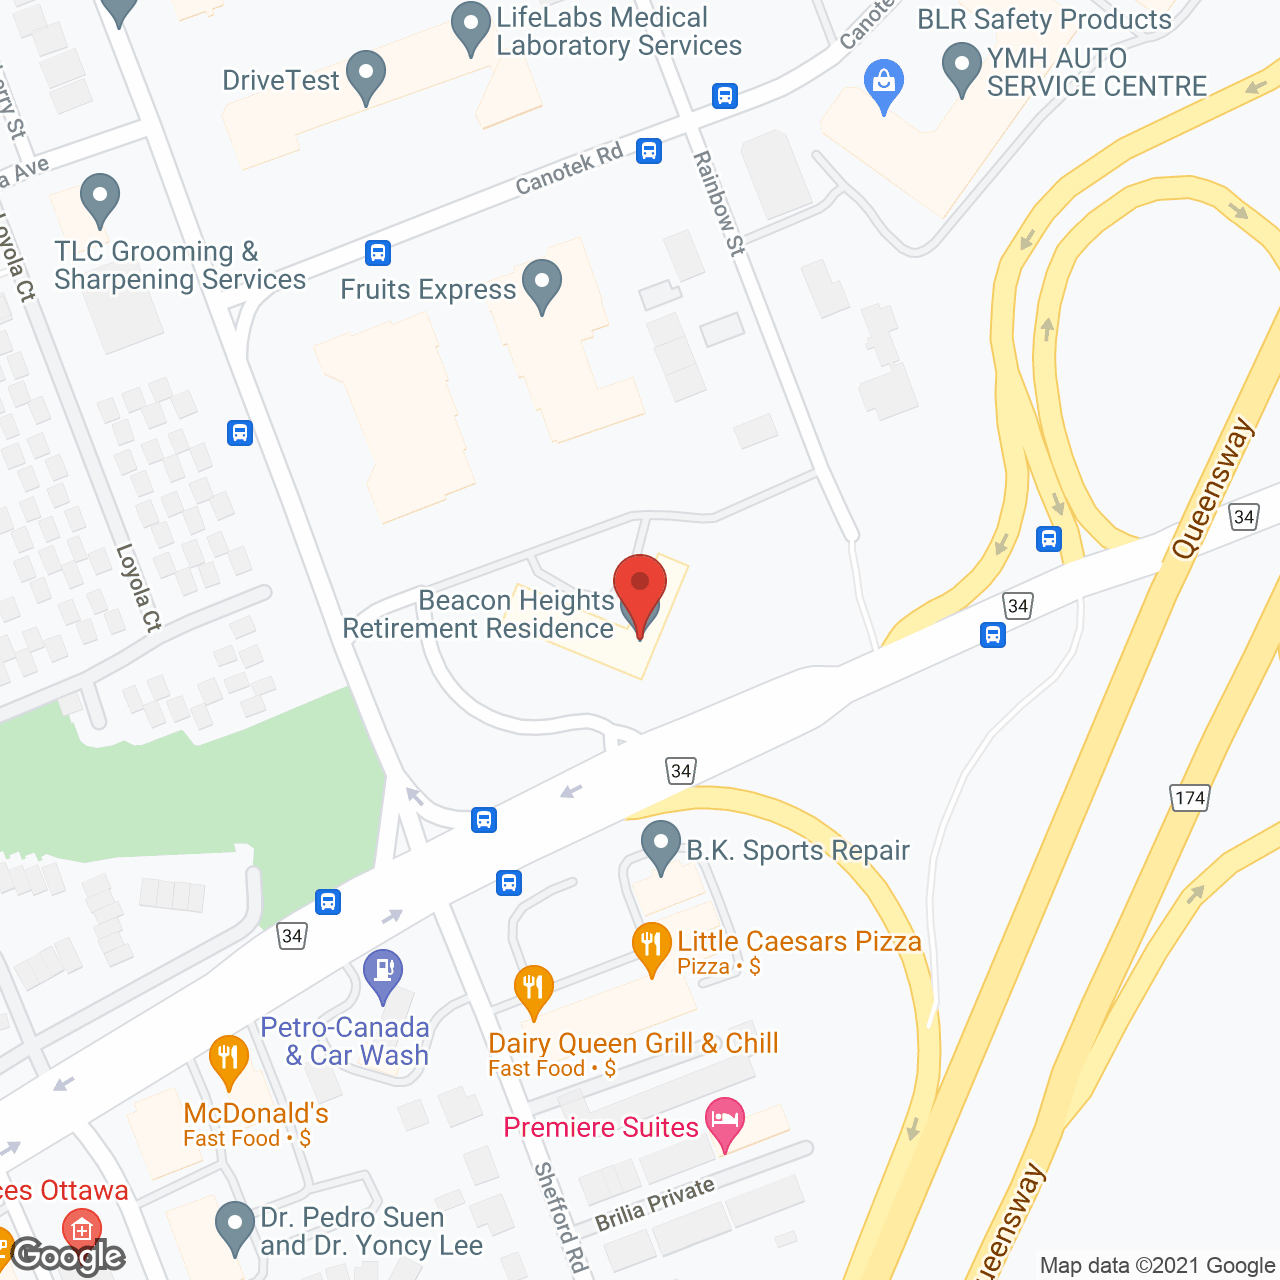 Beacon Heights Retirement Residence in google map